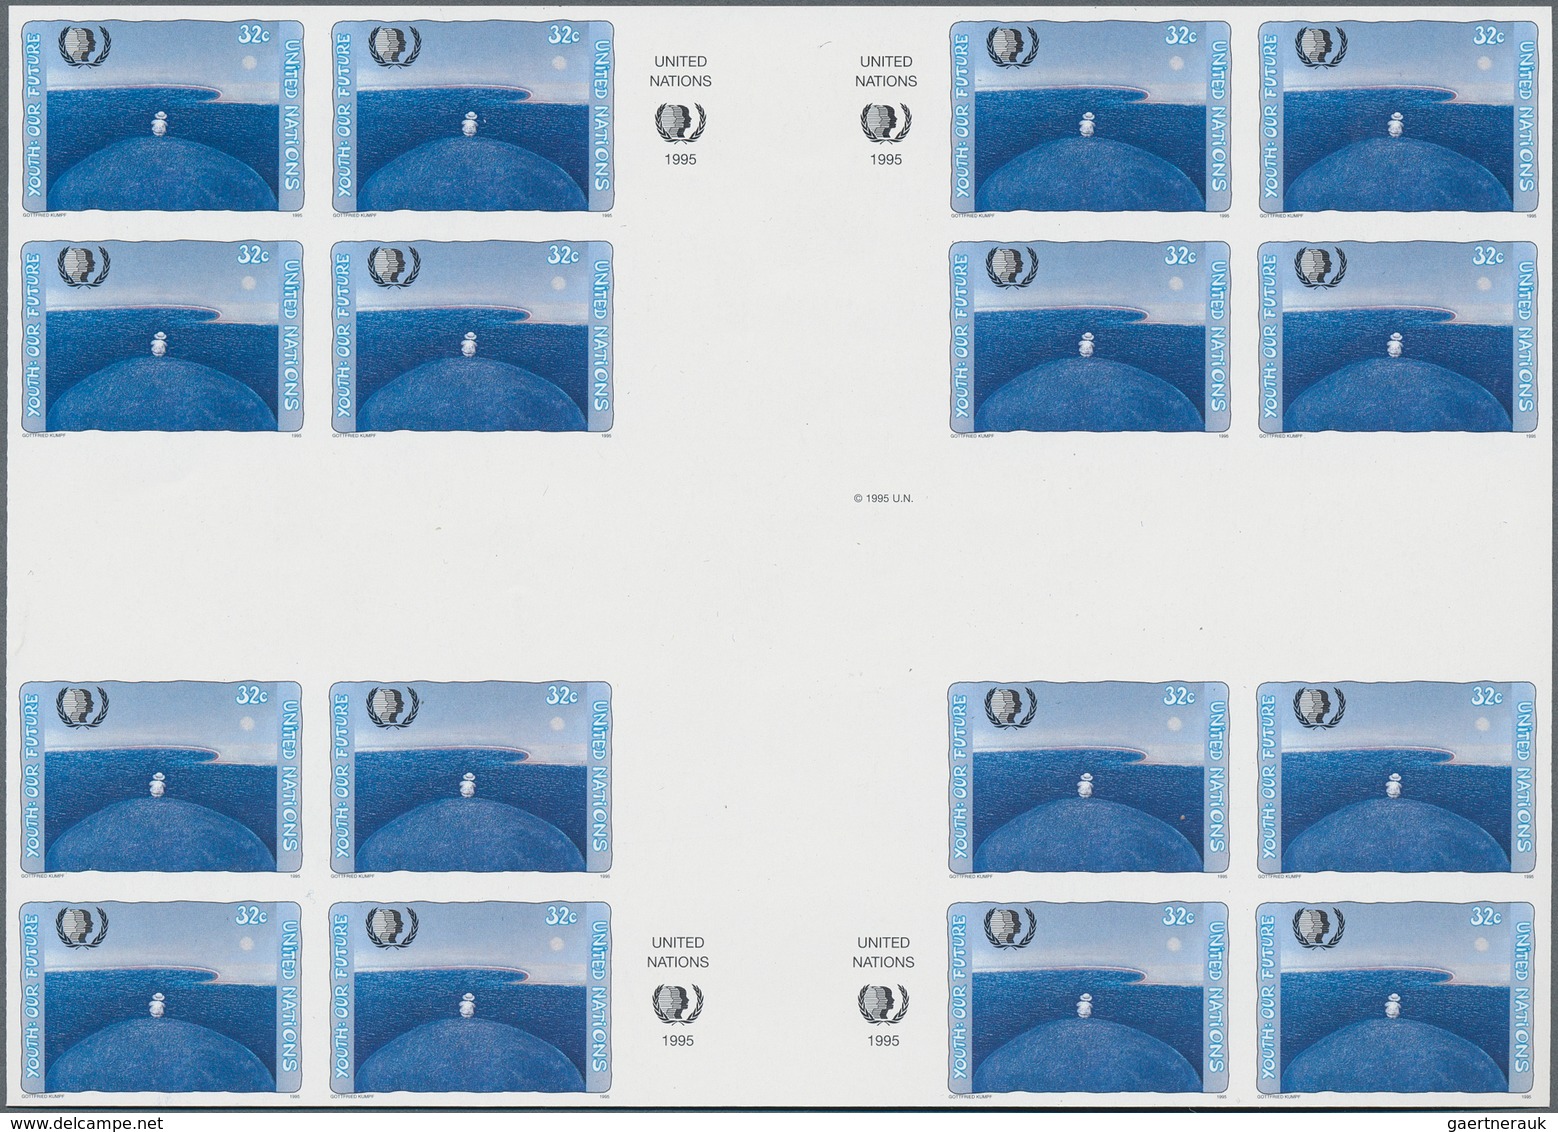 Vereinte Nationen - New York: 1953/2000. Amazing collection of IMPERFORATE stamps and progressive st